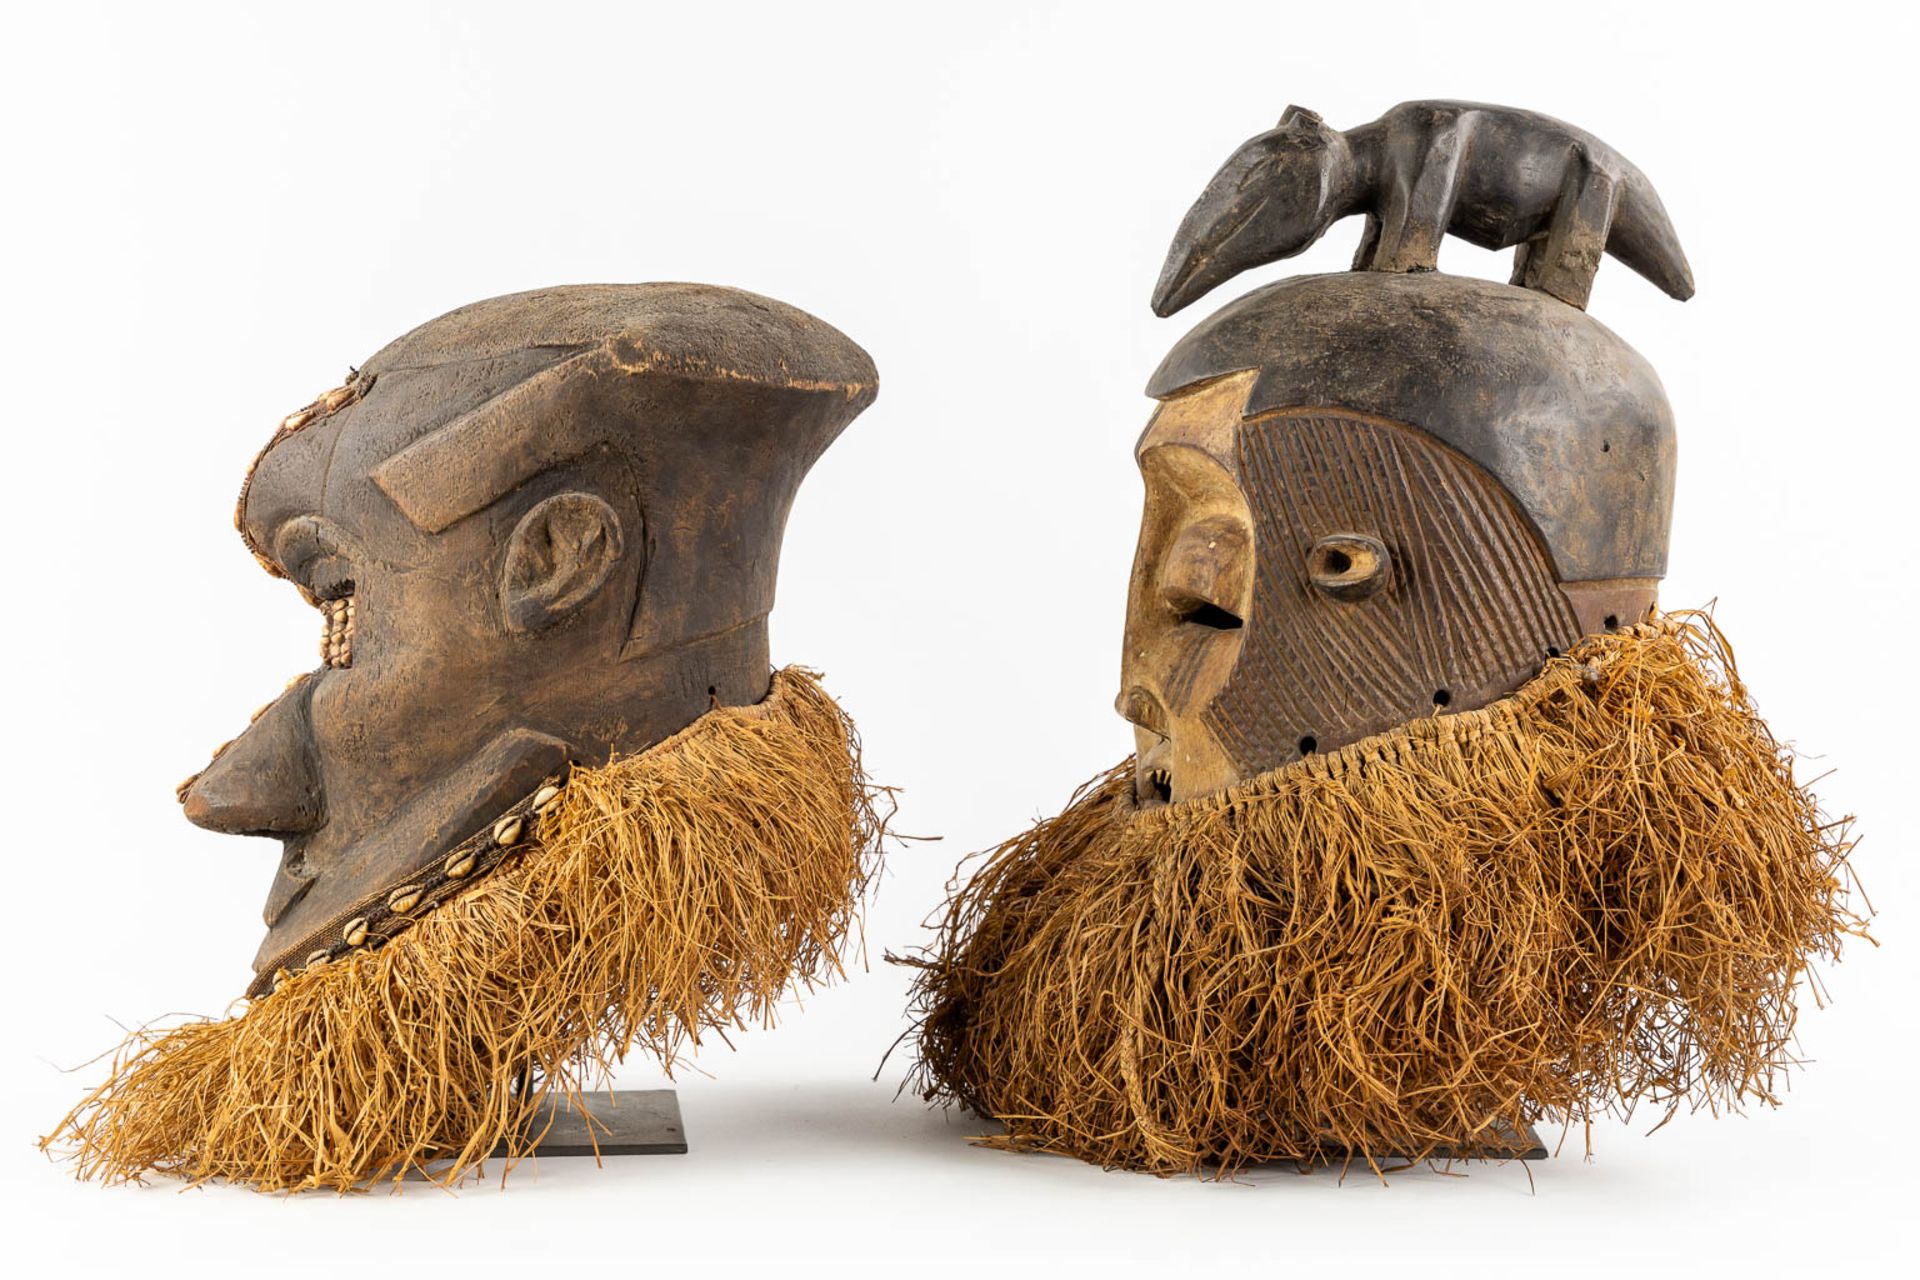 Suku Tribe, two decorative African masks. Wood and straw. (L:44 x W:40 x H:48 cm) - Image 6 of 11